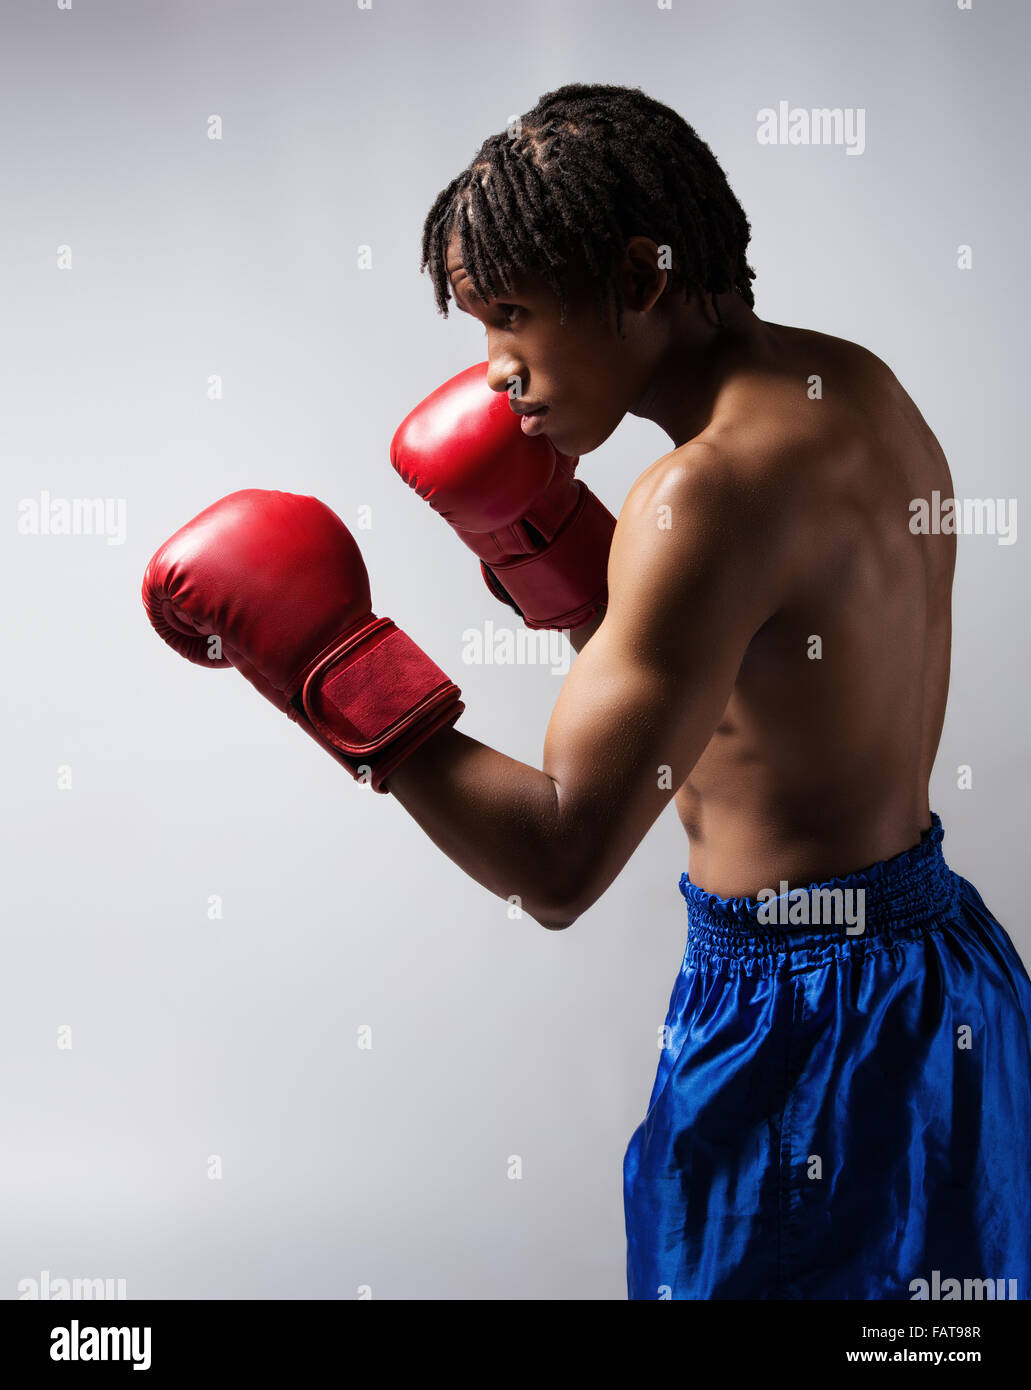 Young muscular athletic male boxer wearing blue boxing shorts and red boxing gloves. Stock Photo